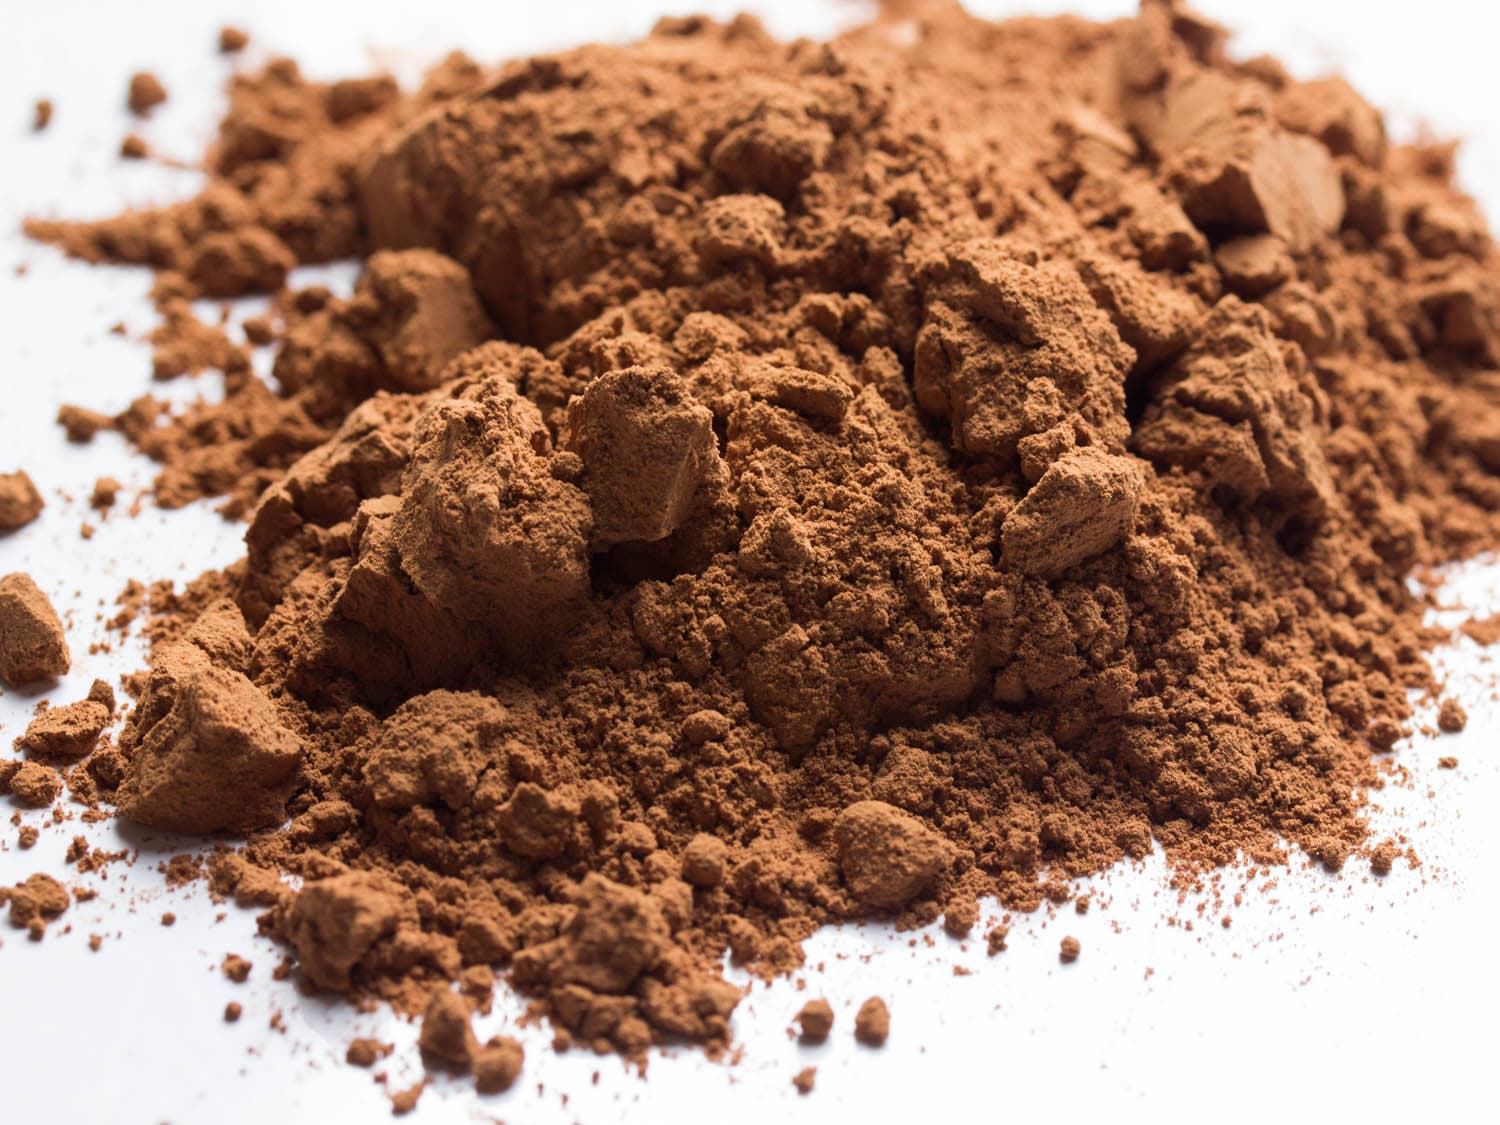 Hight quality Cocoa beans and cocoa powder